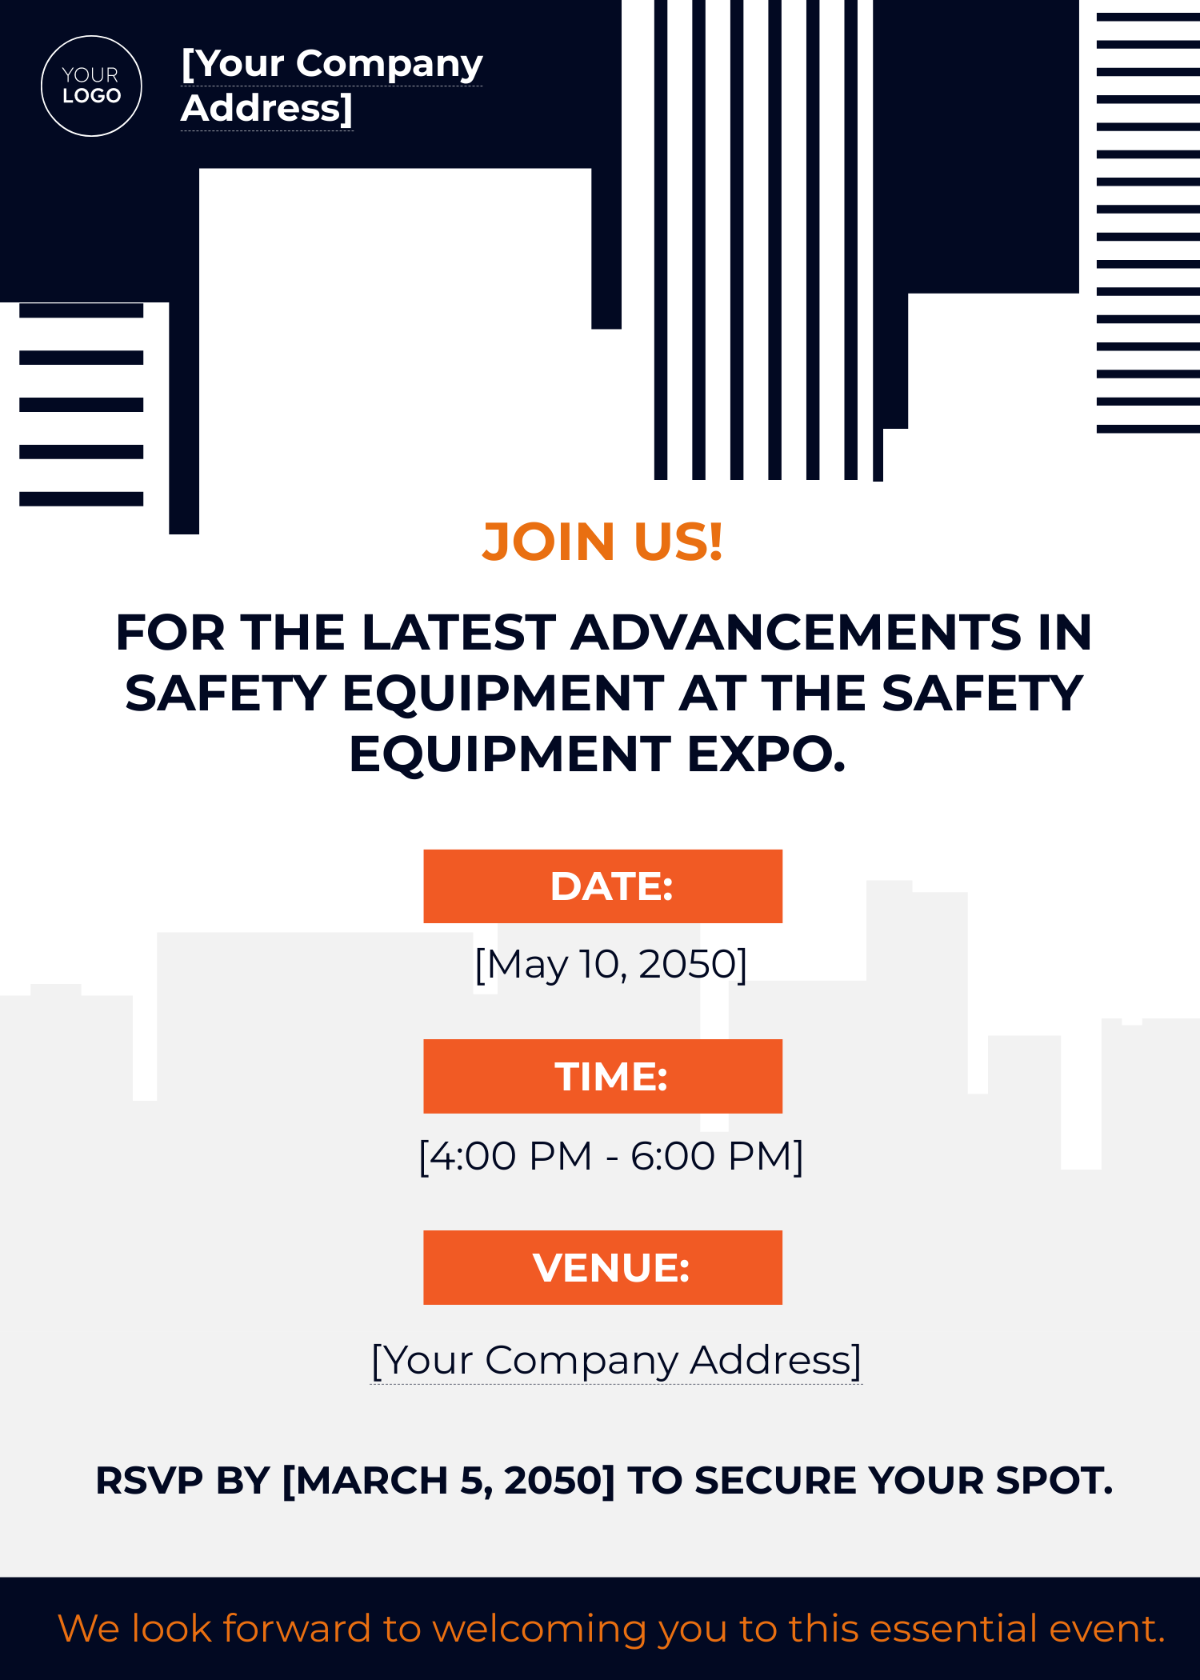 Safety Equipment Expo Invitation Card